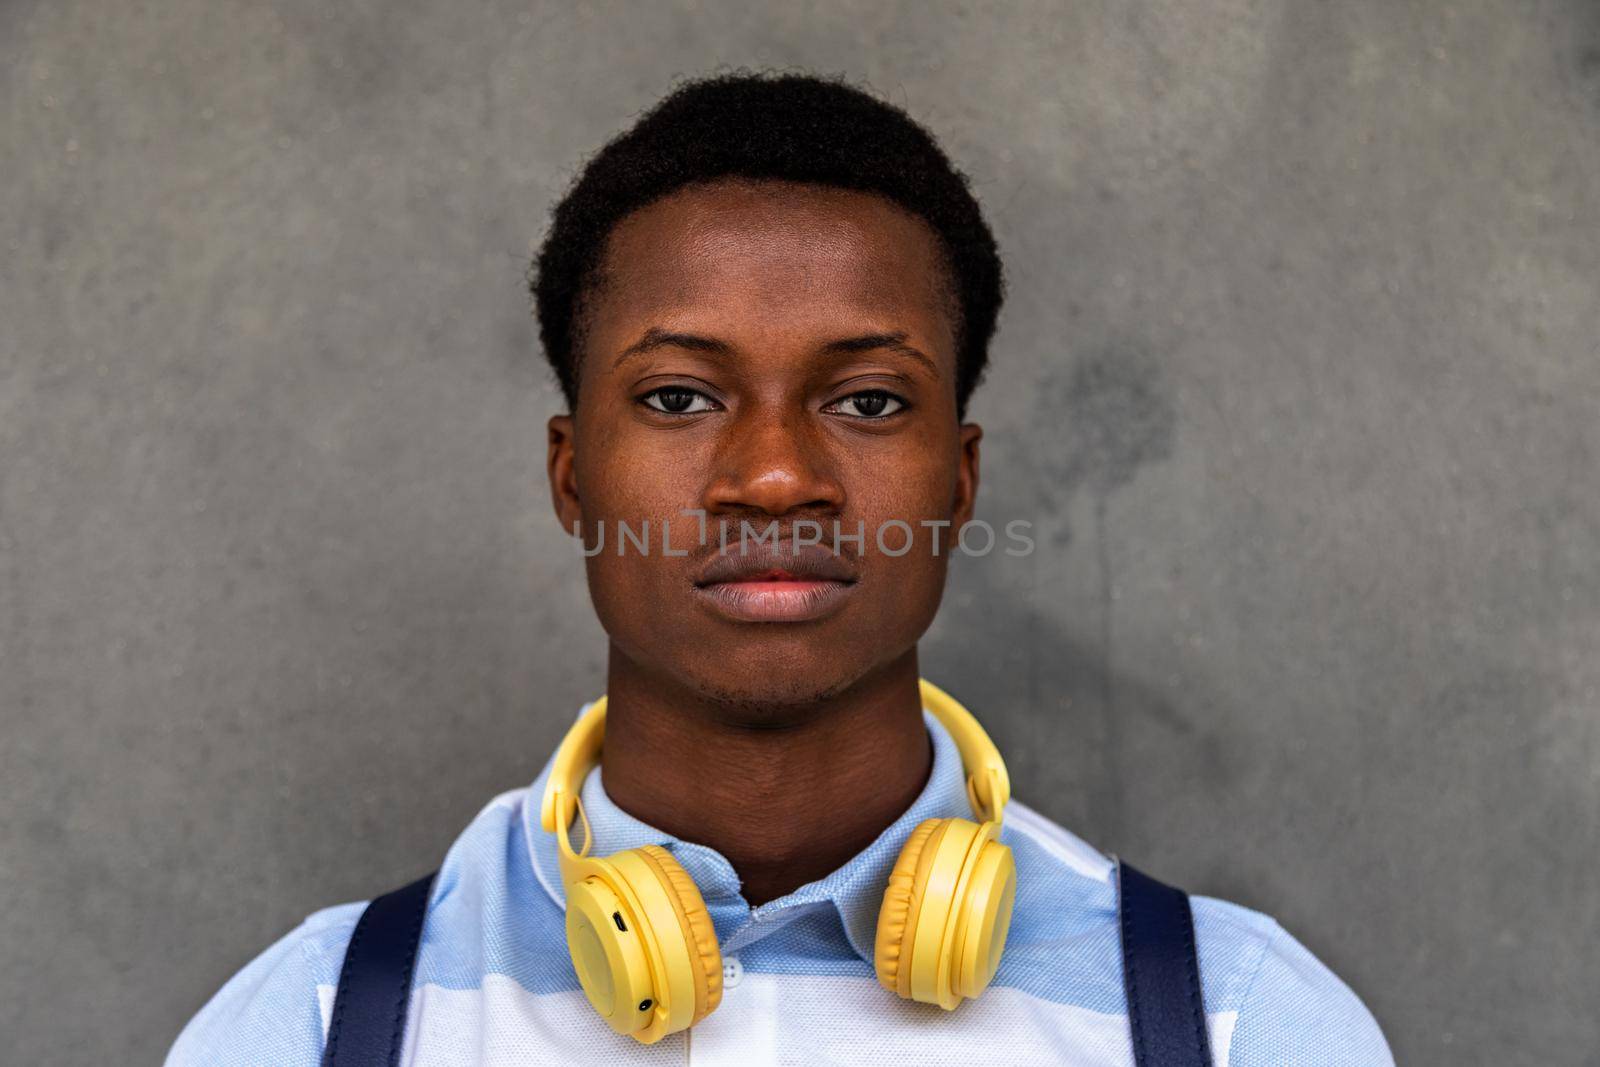 Teen African American male high school student looking at camera with serious expression. Back to school concept.